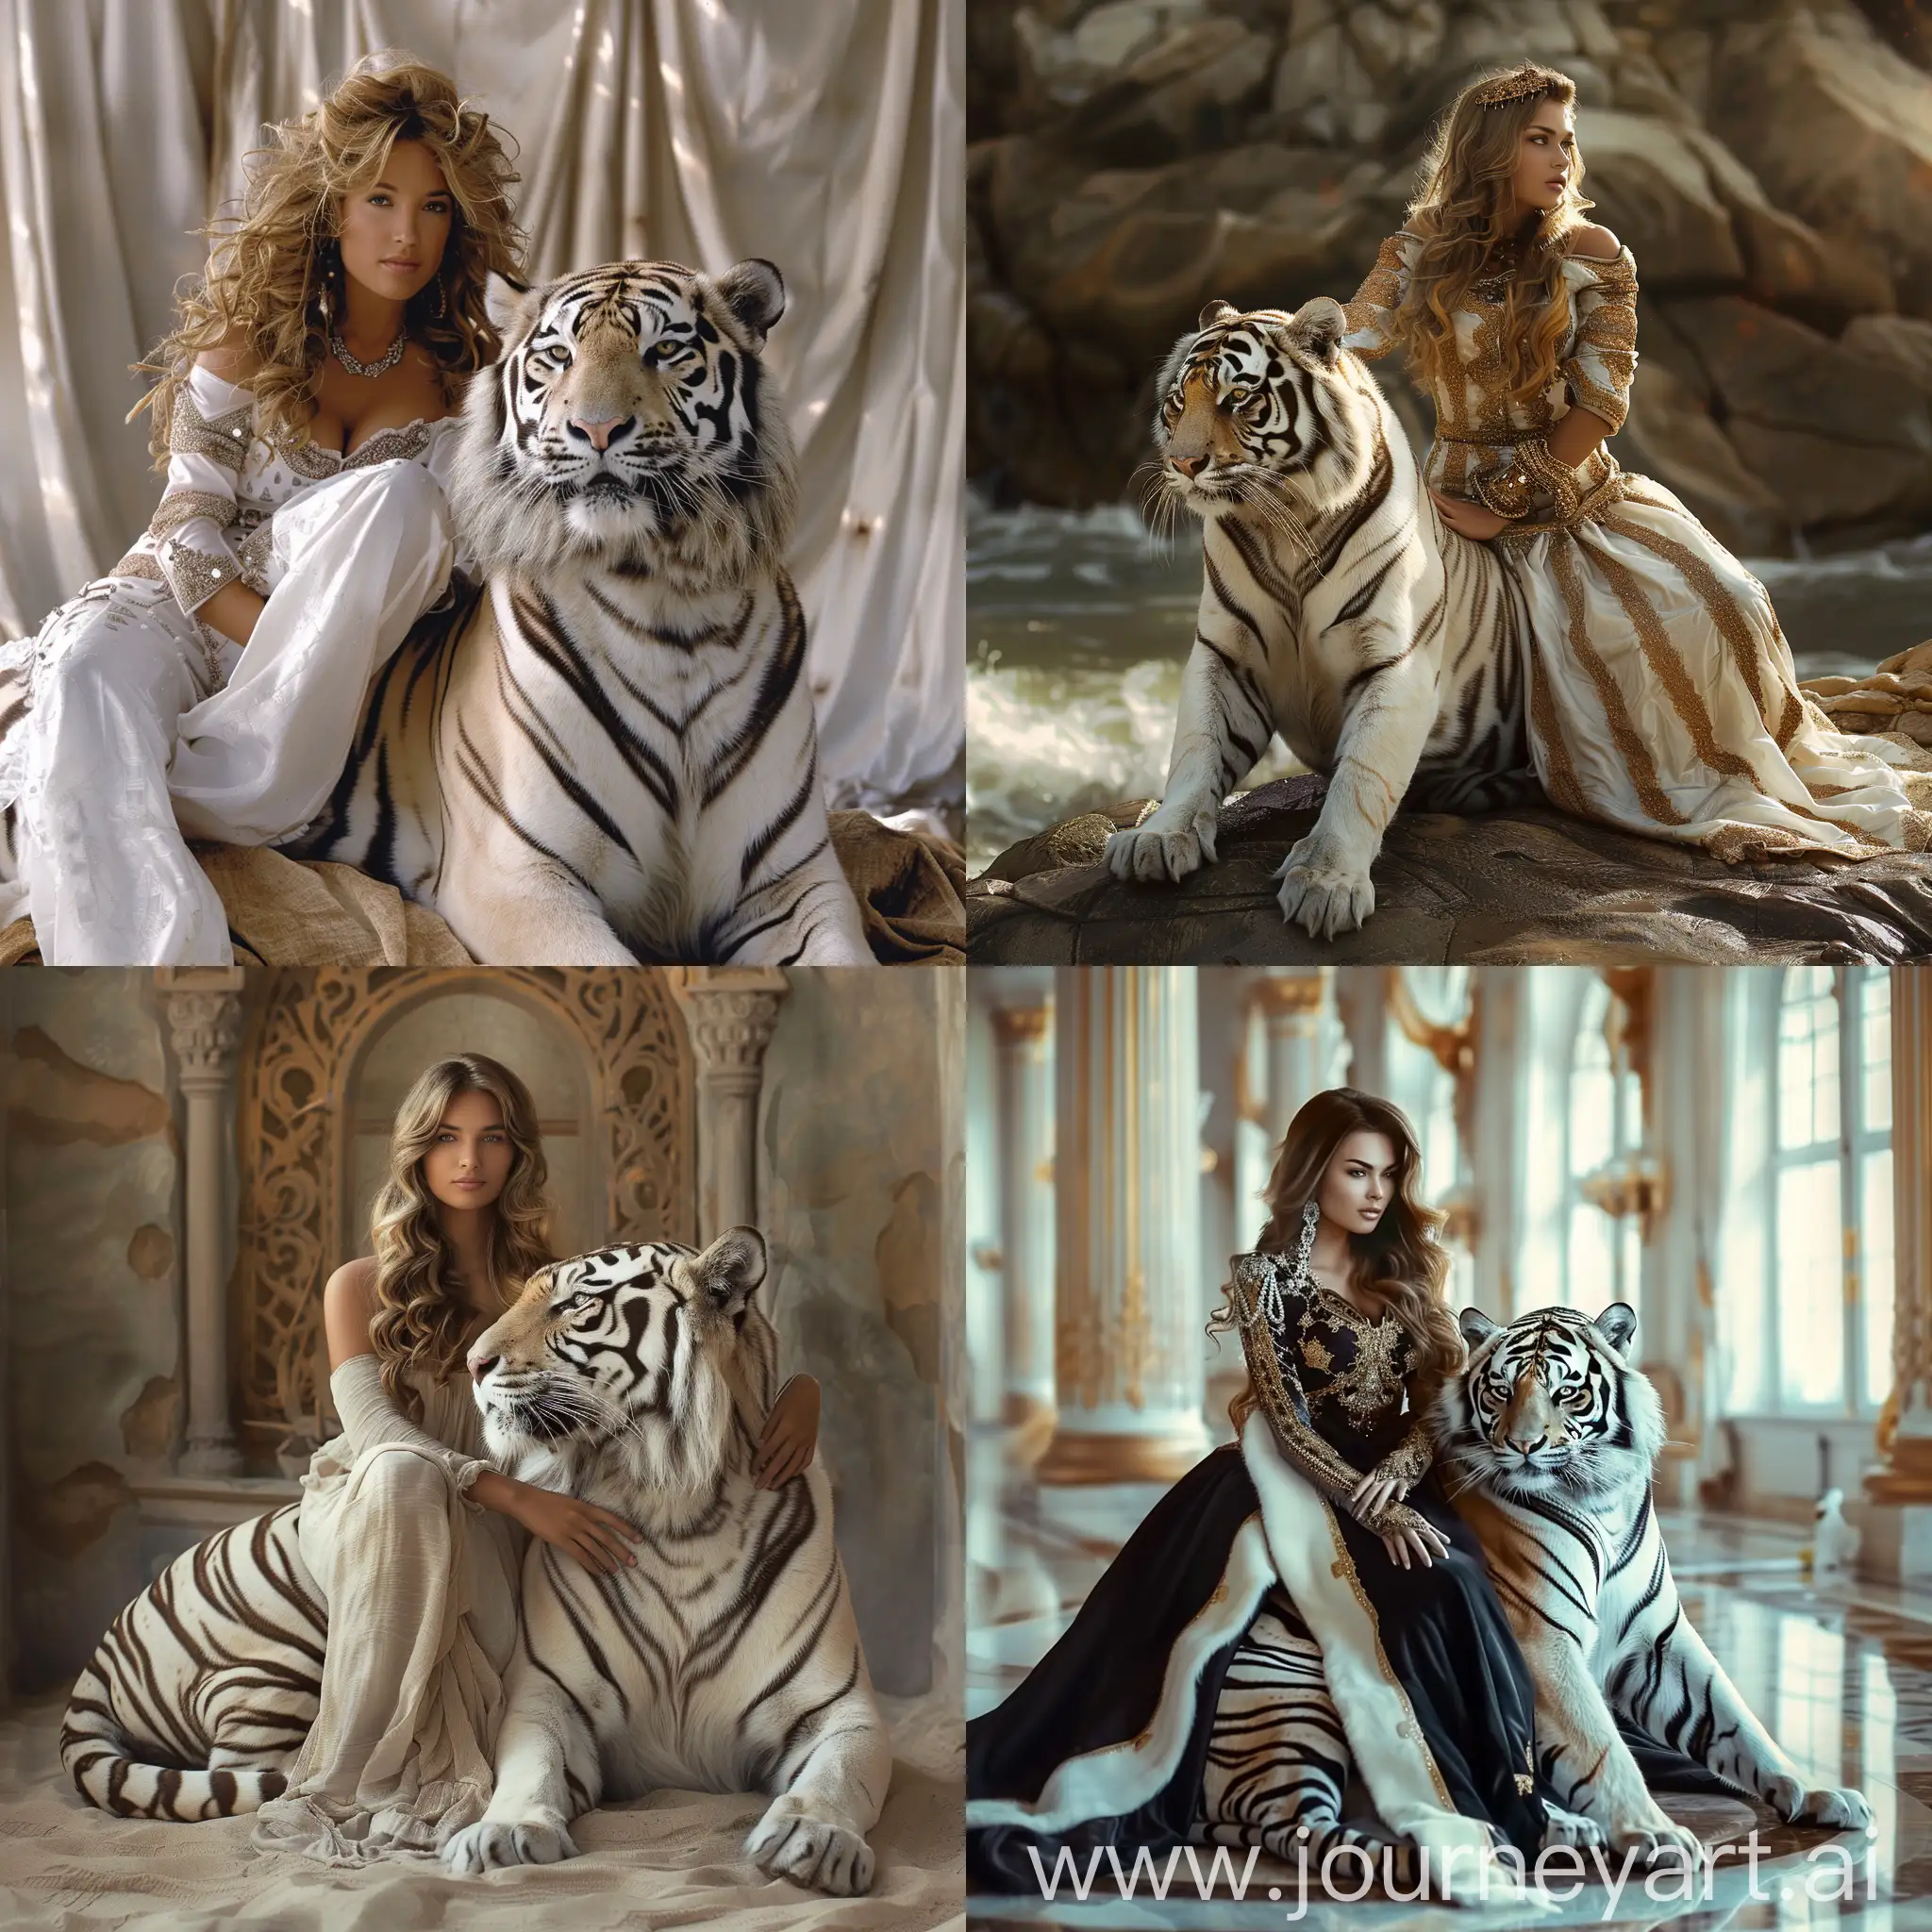 Stunning-Woman-Poses-Gracefully-on-Majestic-White-Tiger